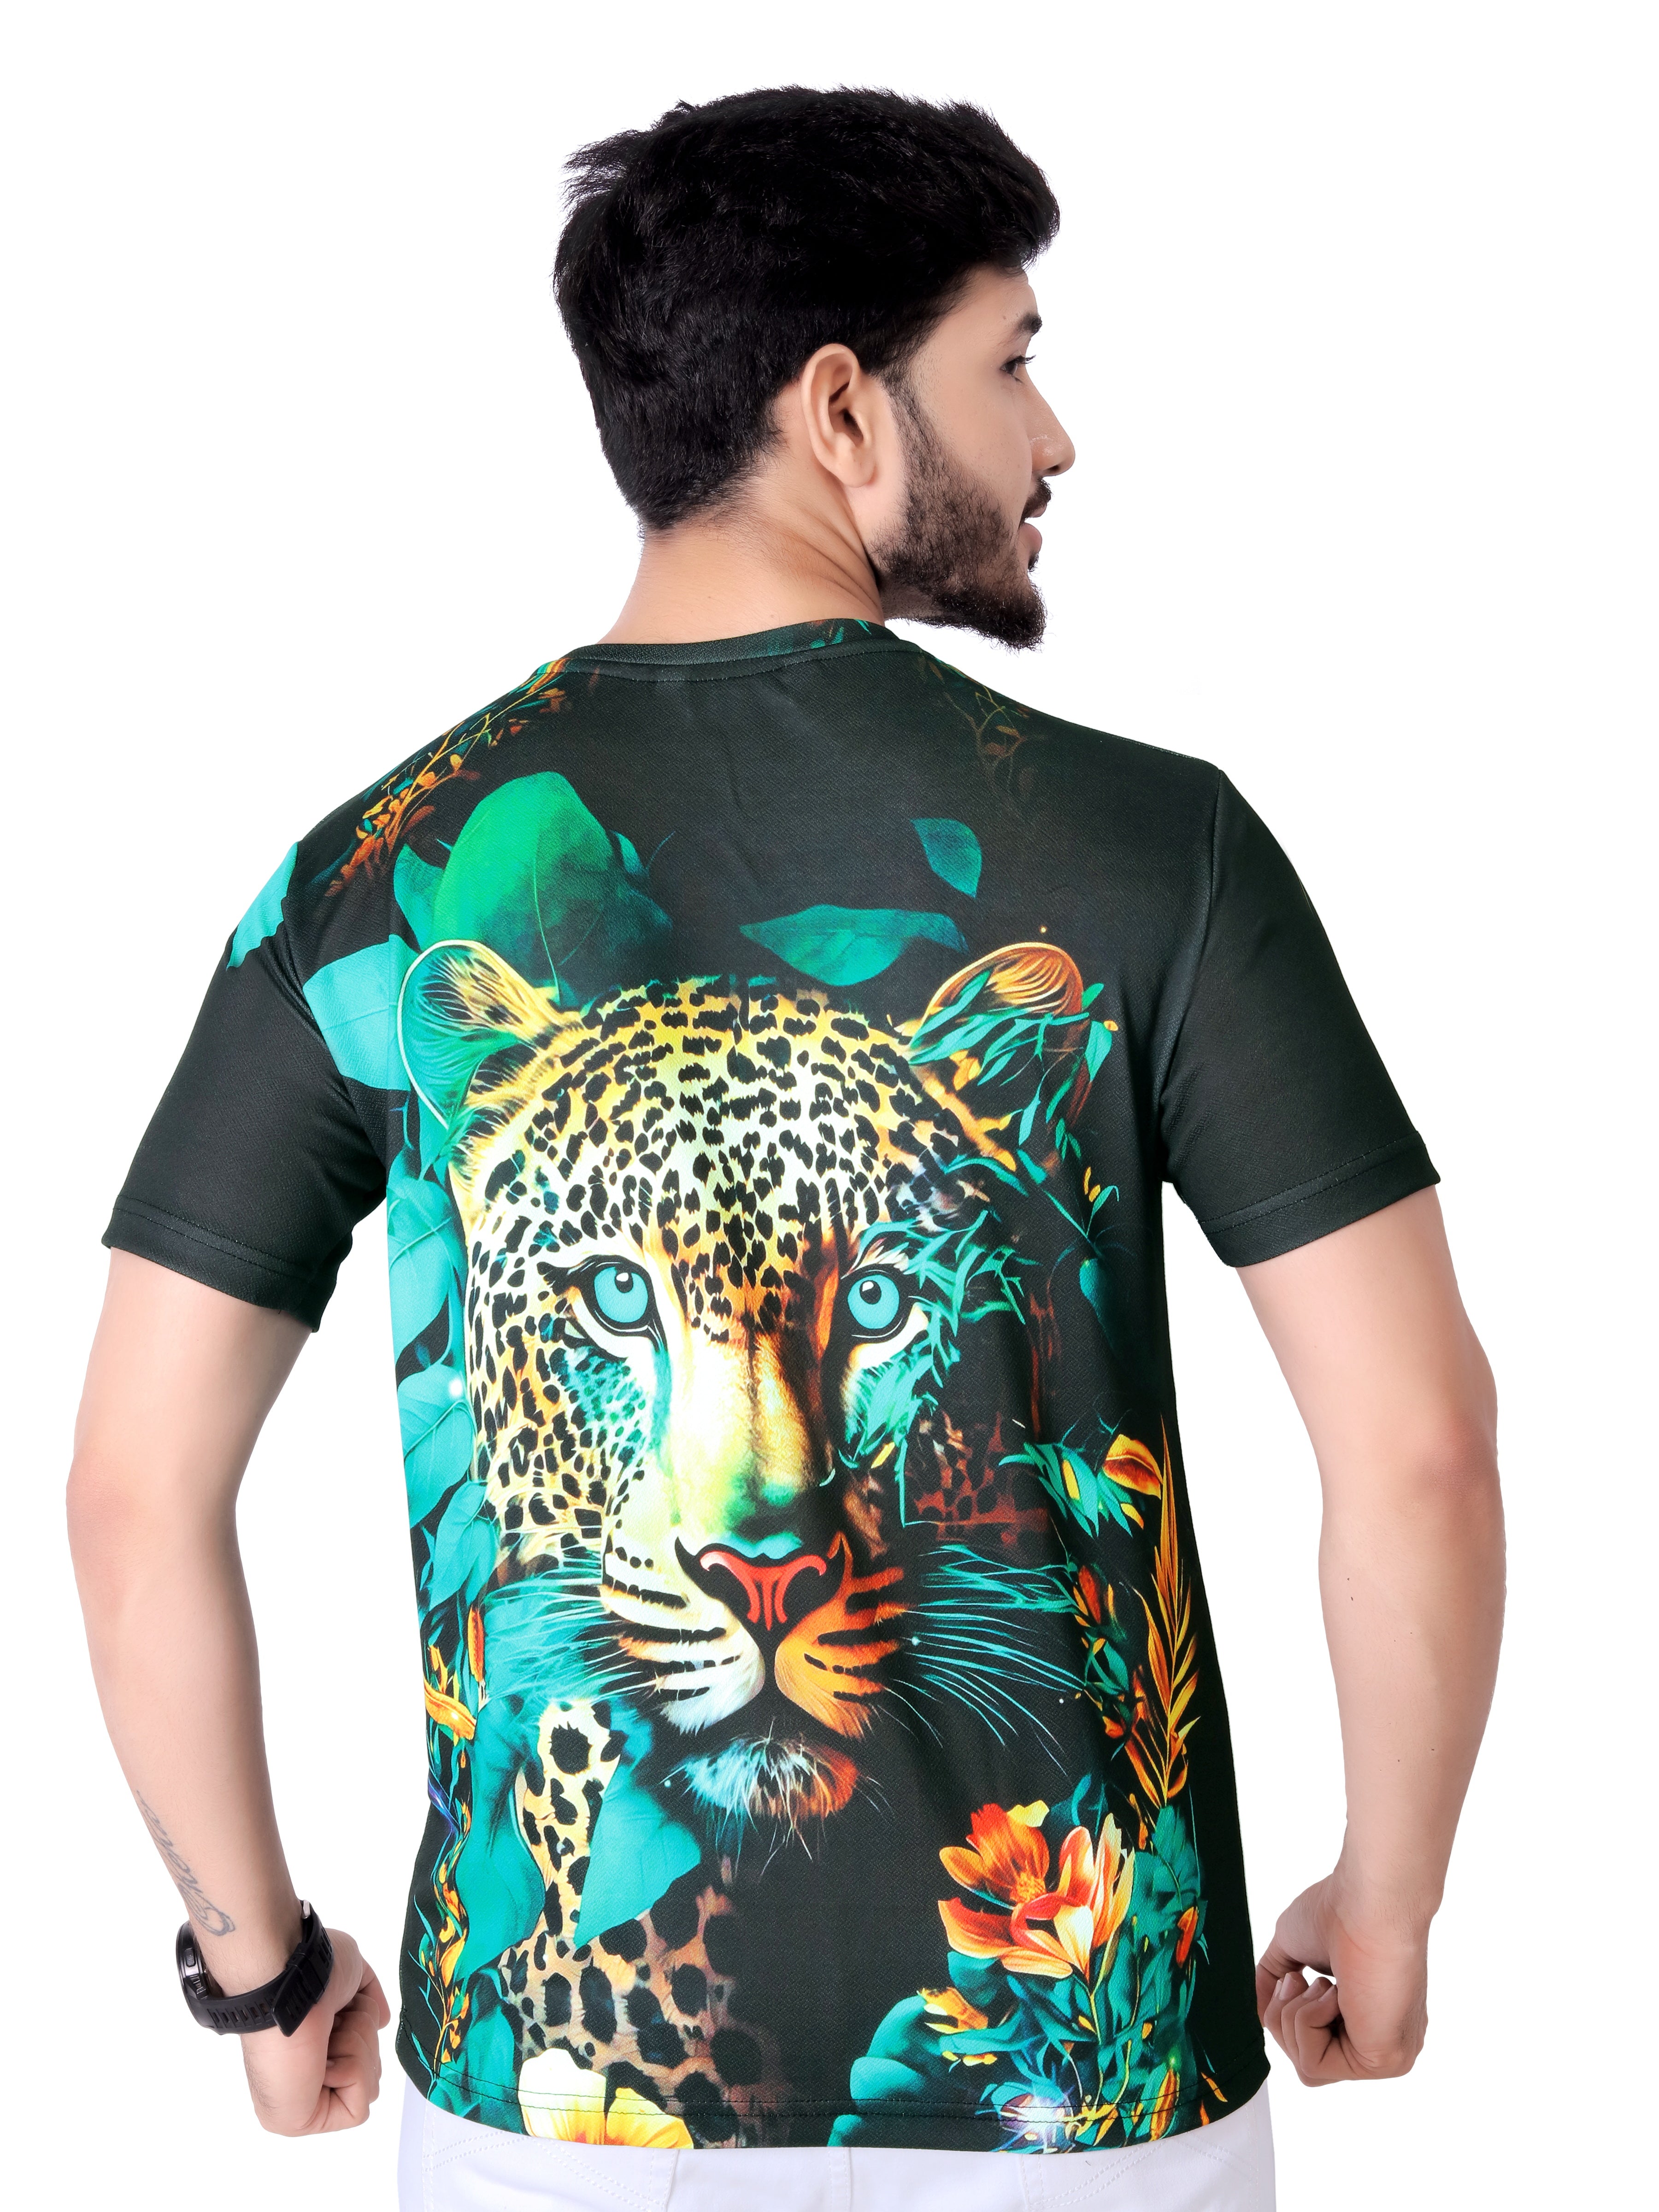 Vintage Animal T Shirt For Men 3D Fierce Leopard Print Tees Summer Short Sleeve Holiday T-Shirts Loose Clothing O-neck Pullover